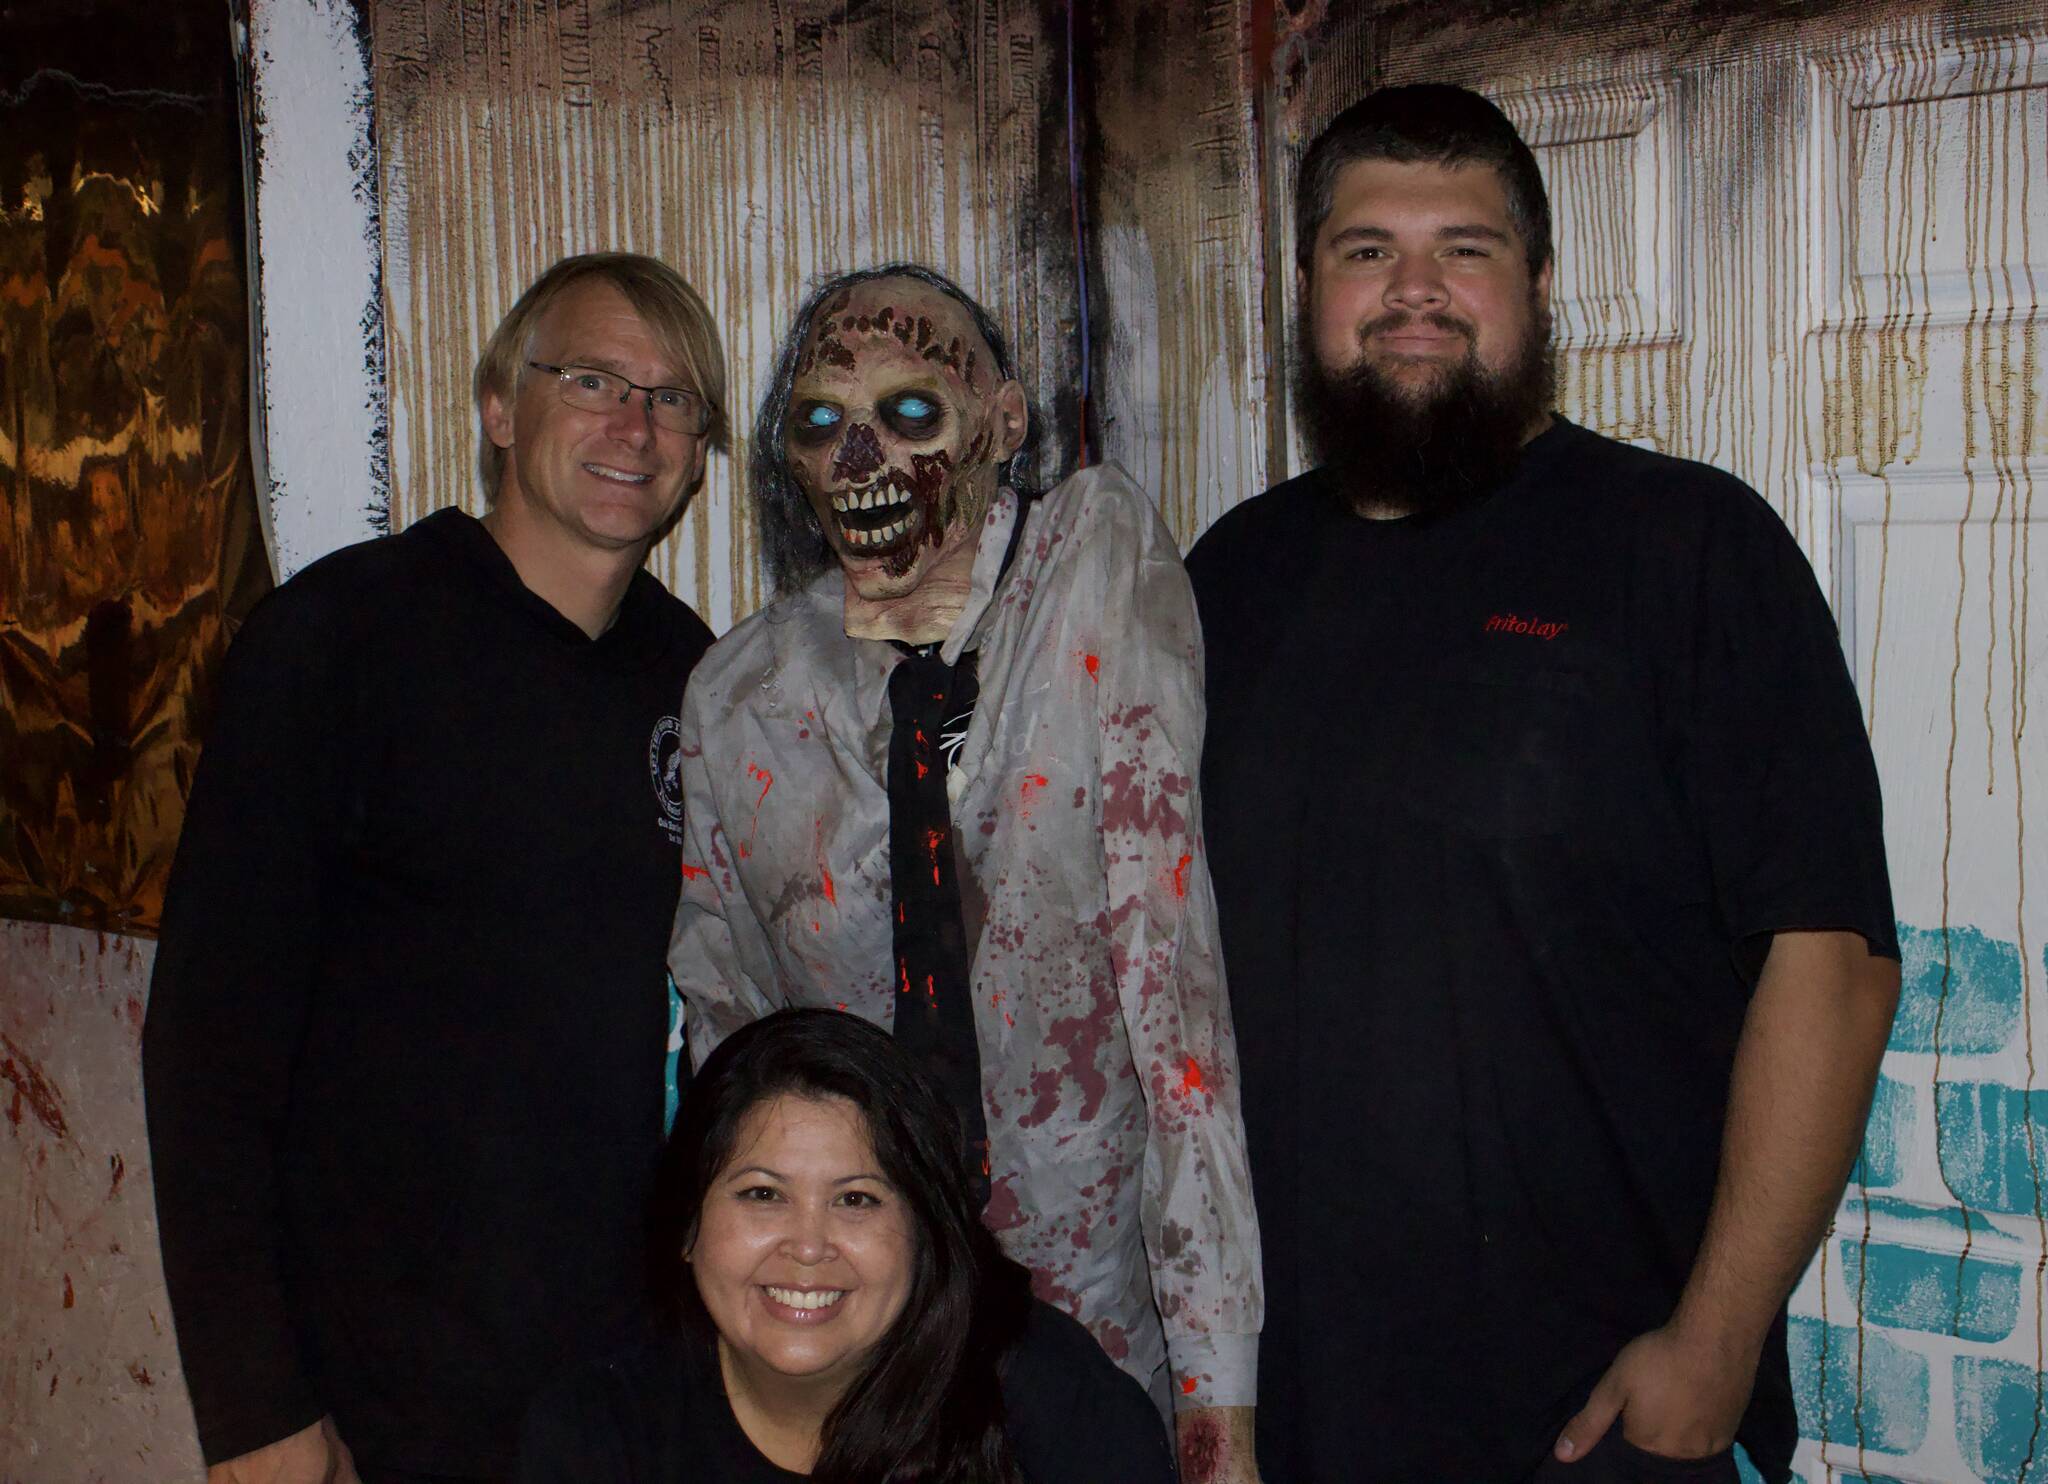 Photo by Rachel Rosen/Whidbey News-Times
L-R: James Croft, Priscilla Croft and Jacob Boyes run the haunted house at the Roller Barn every year.